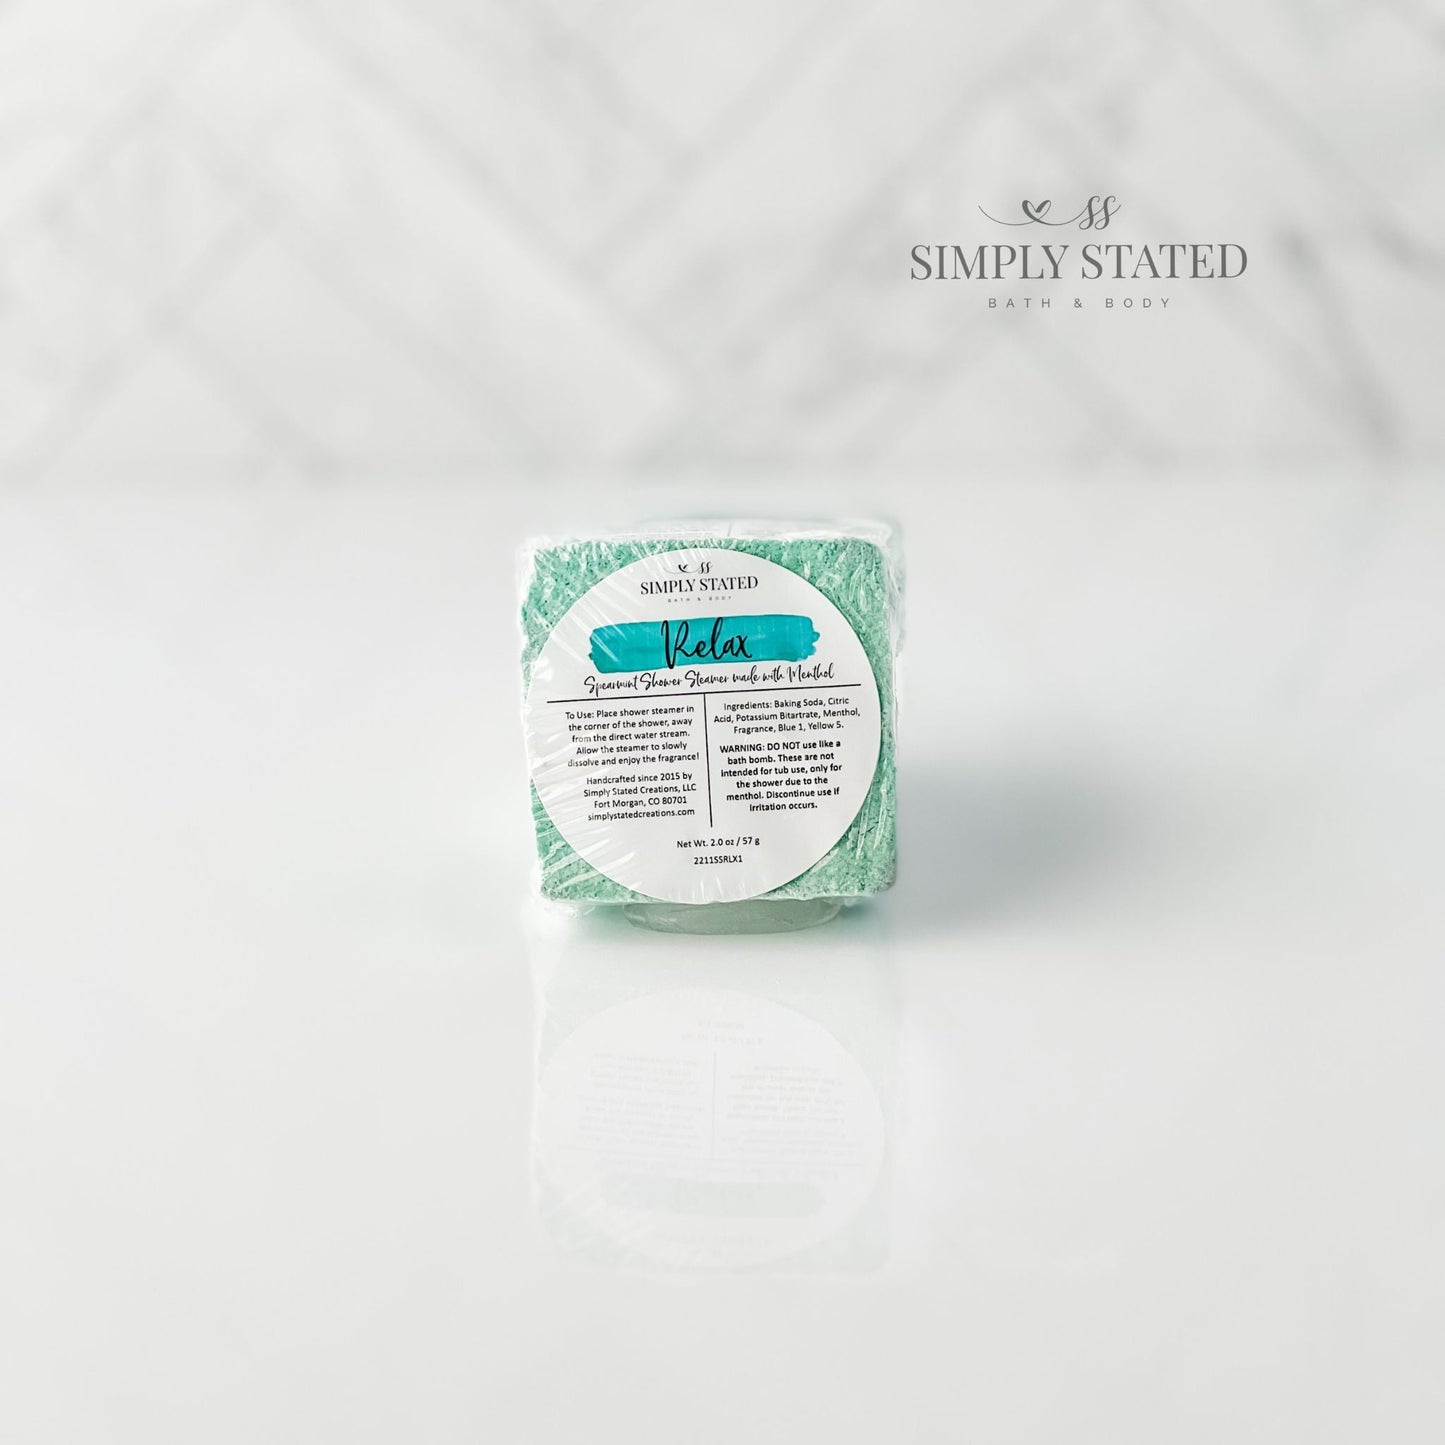 Shower Steamers with menthol